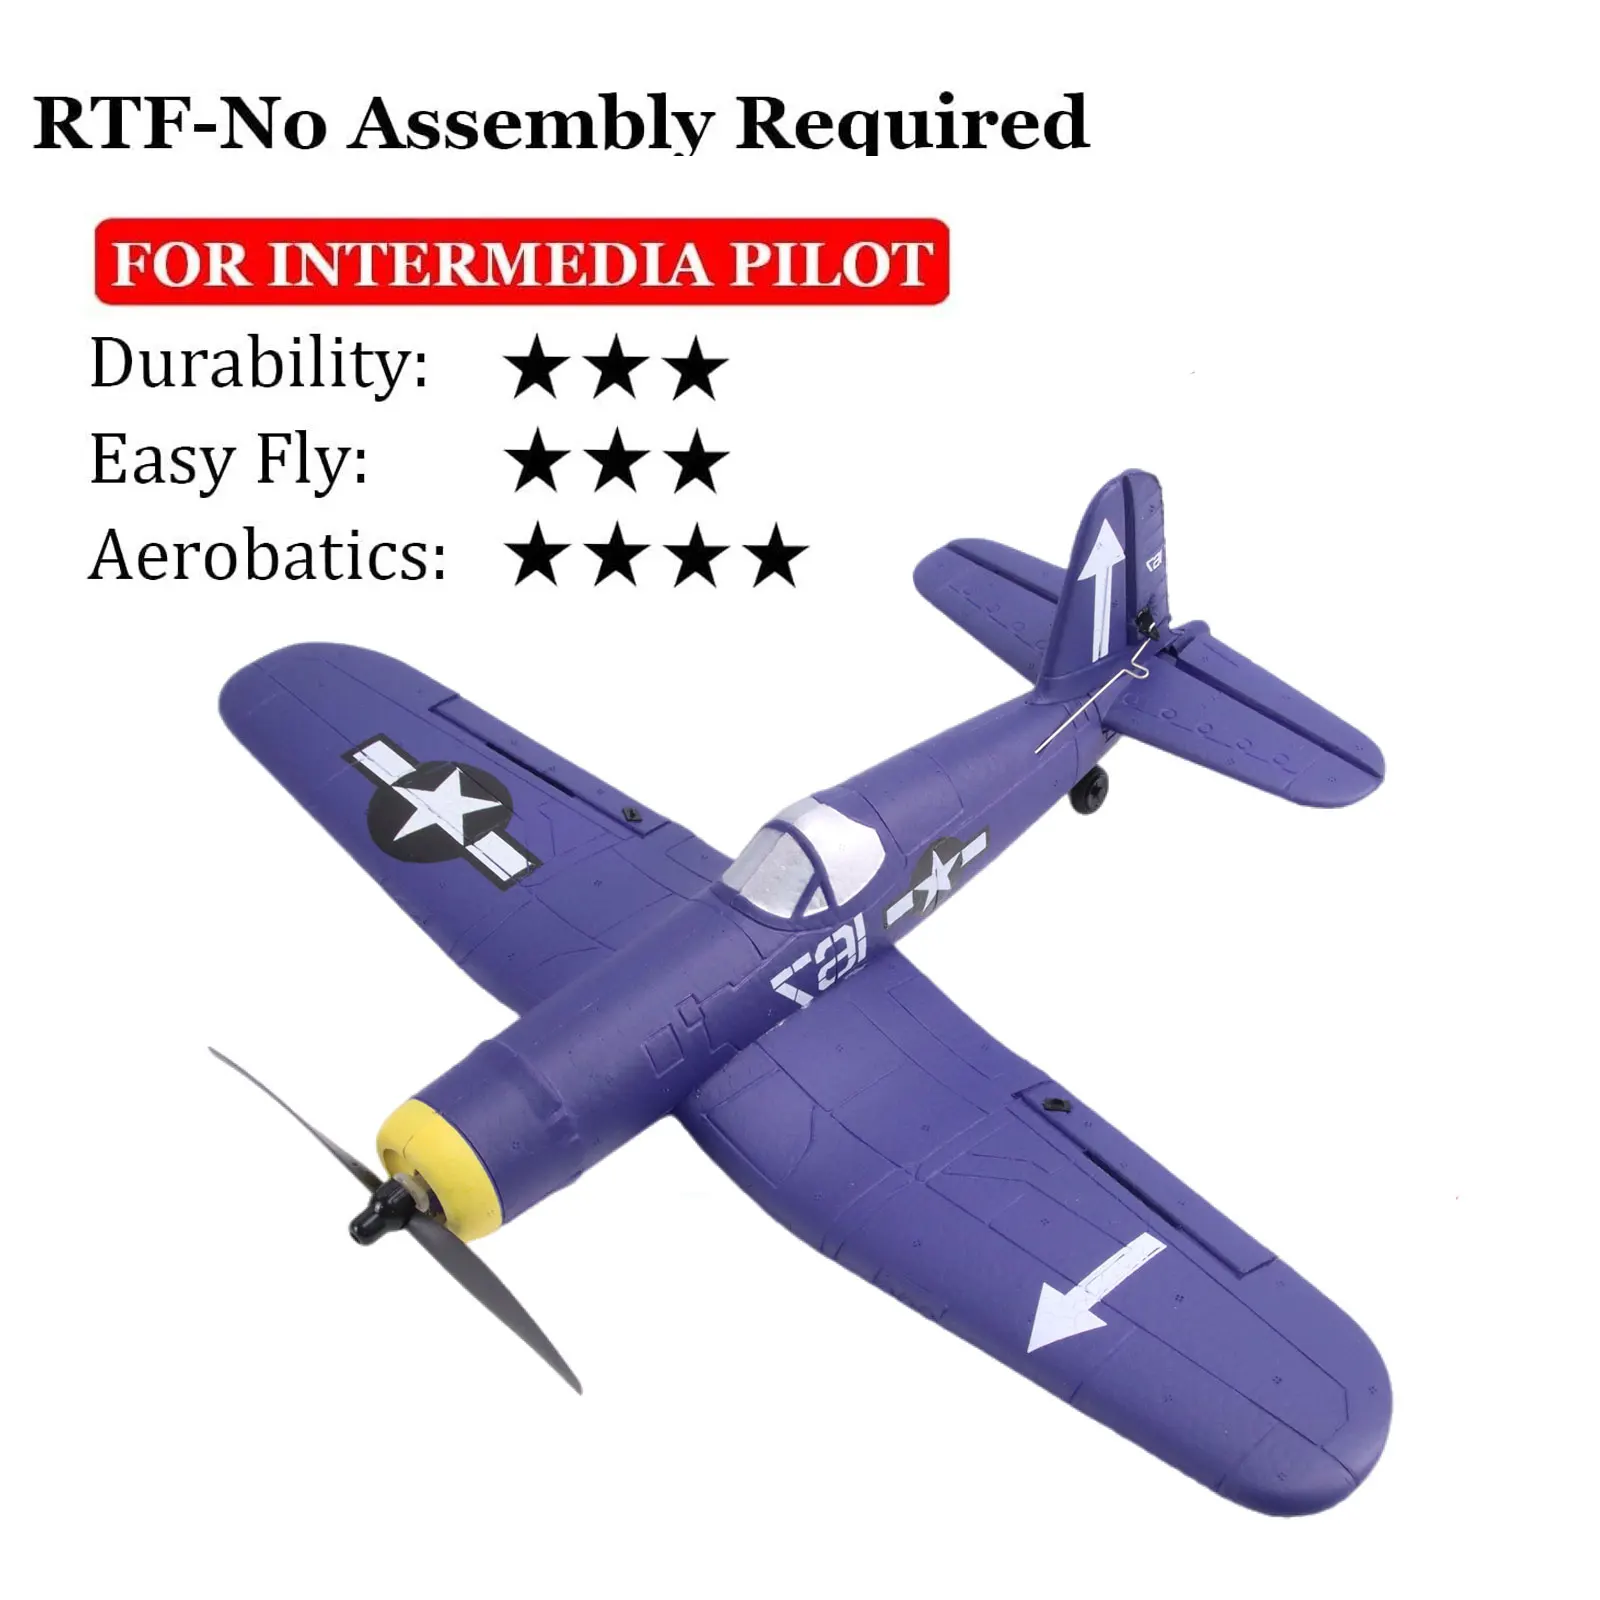 

New 4CH Remote Control Plane F4U Corsair 2.4Ghz RC Plane RTF EPP 761-8 400mm for Beginner rc Aircraft gifts for Children Adults